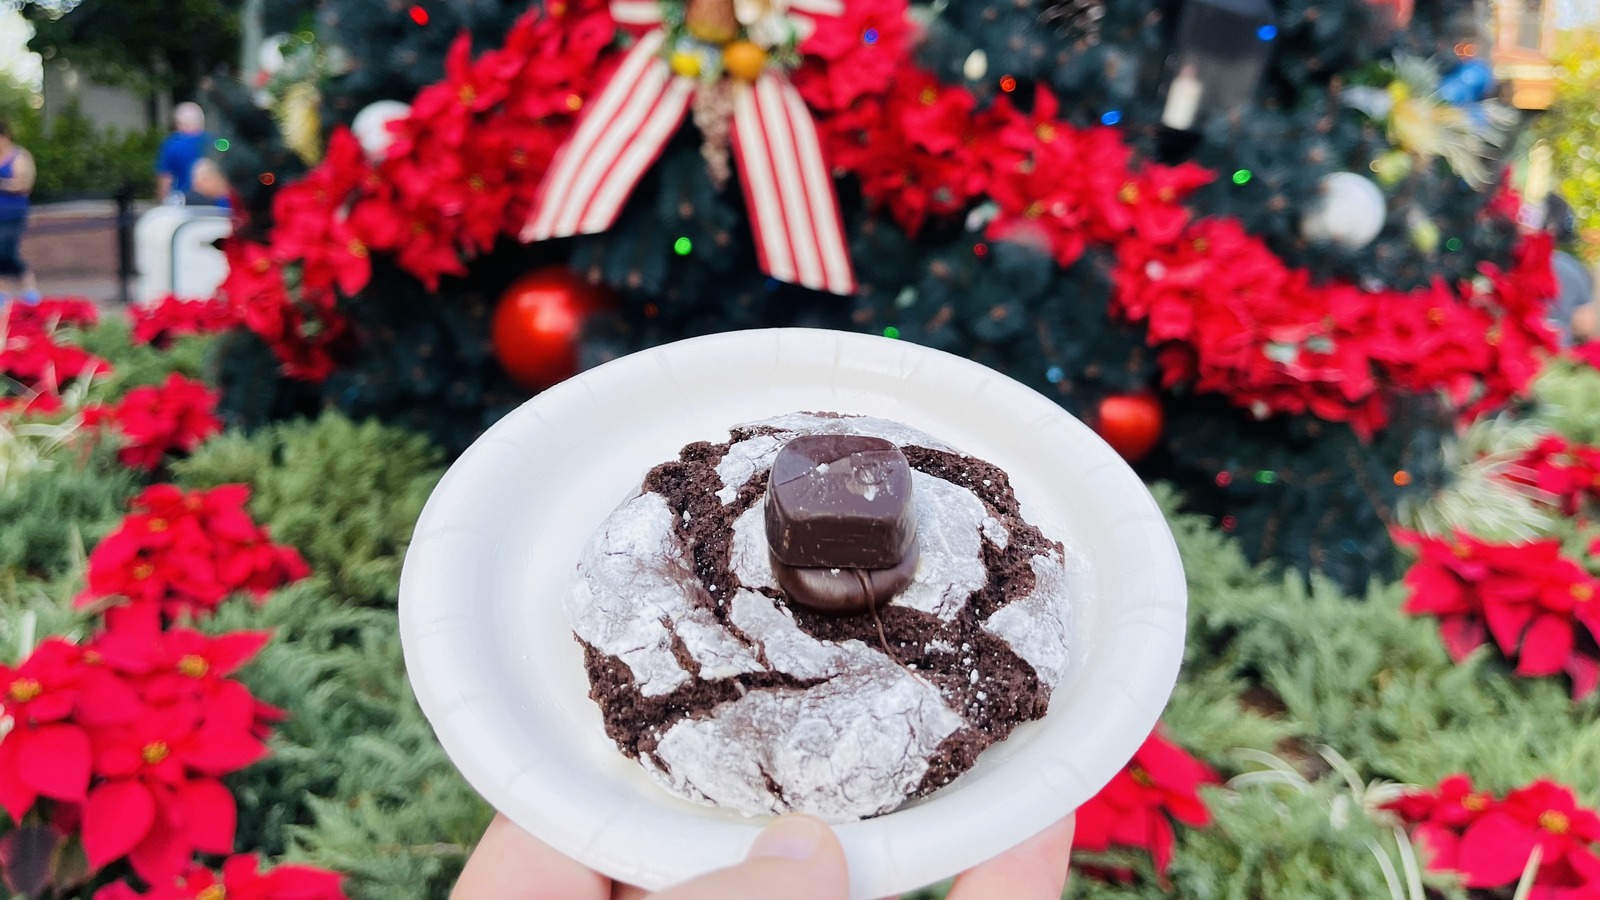 We Tried Disney's Popular Holiday Cookie Stroll. Here's How It Went